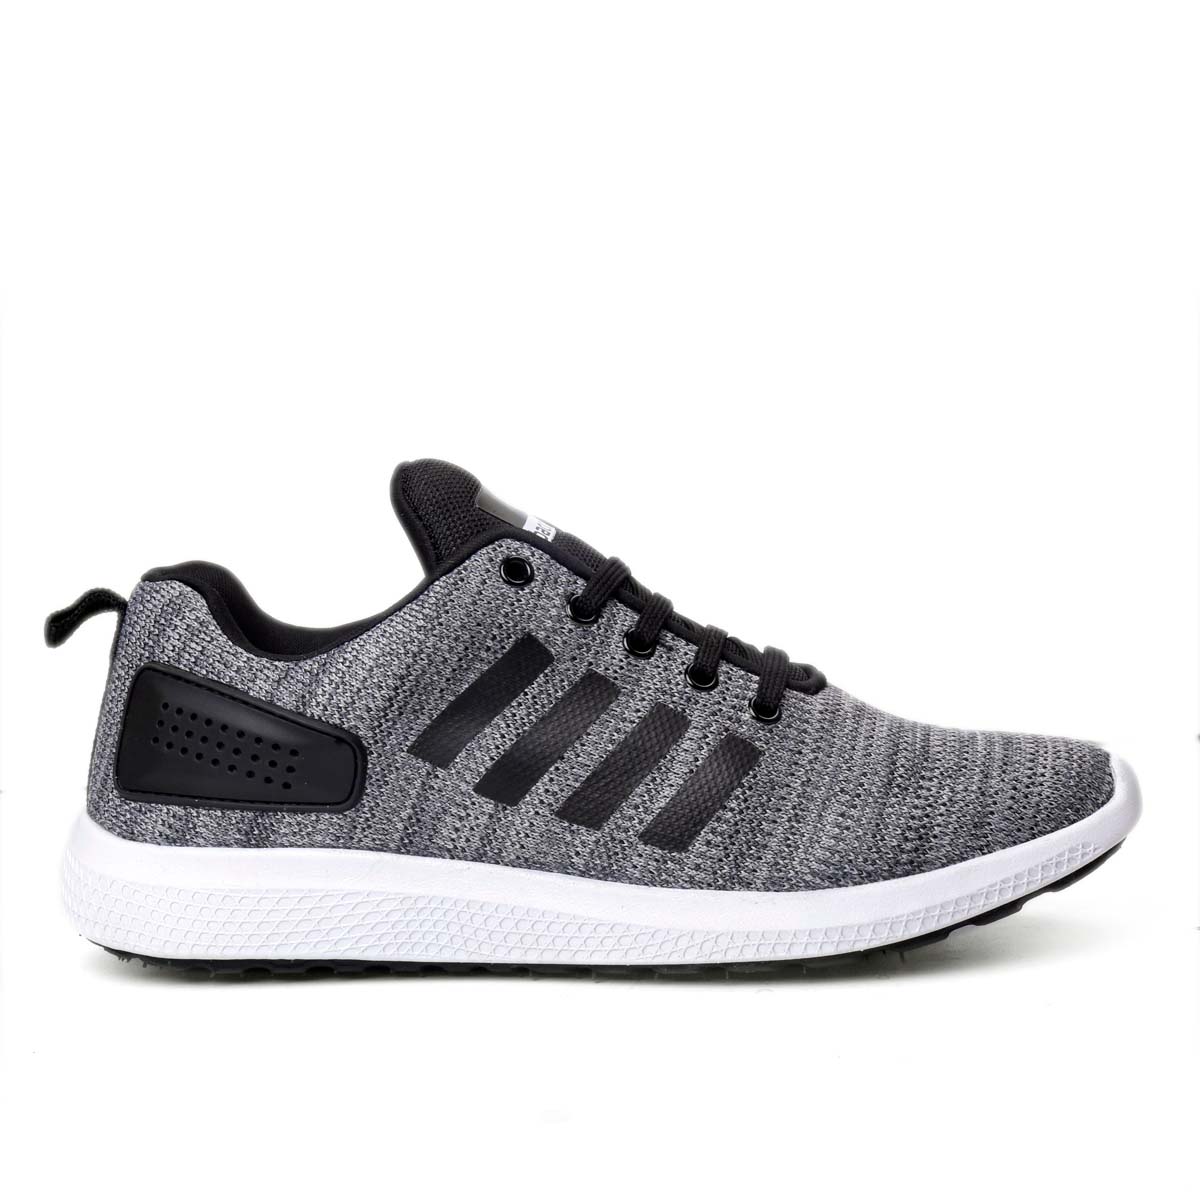 Bacca Bucci Mens Trainers Athletic Jogging fitness Sports Shoes/sneakers